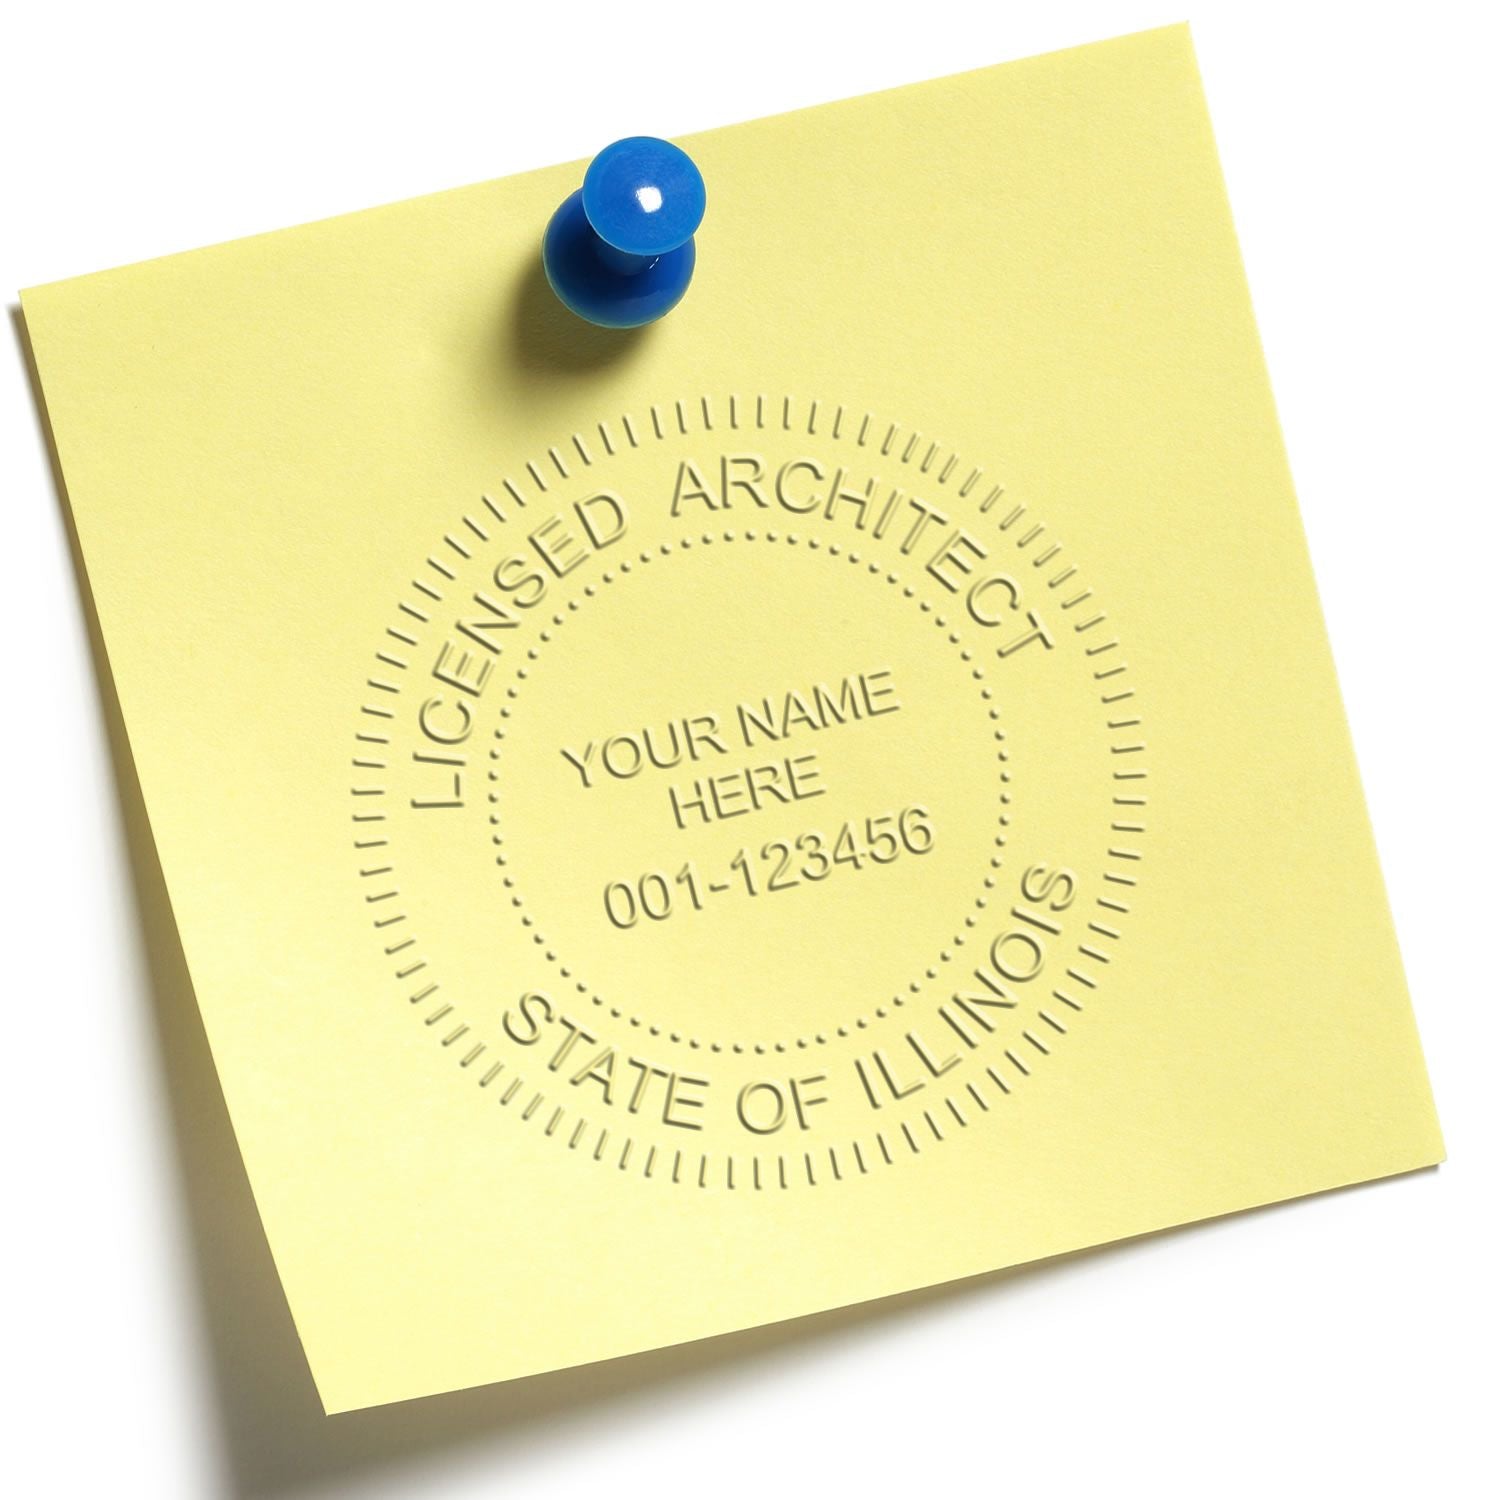 The main image for the Extended Long Reach Illinois Architect Seal Embosser depicting a sample of the imprint and electronic files